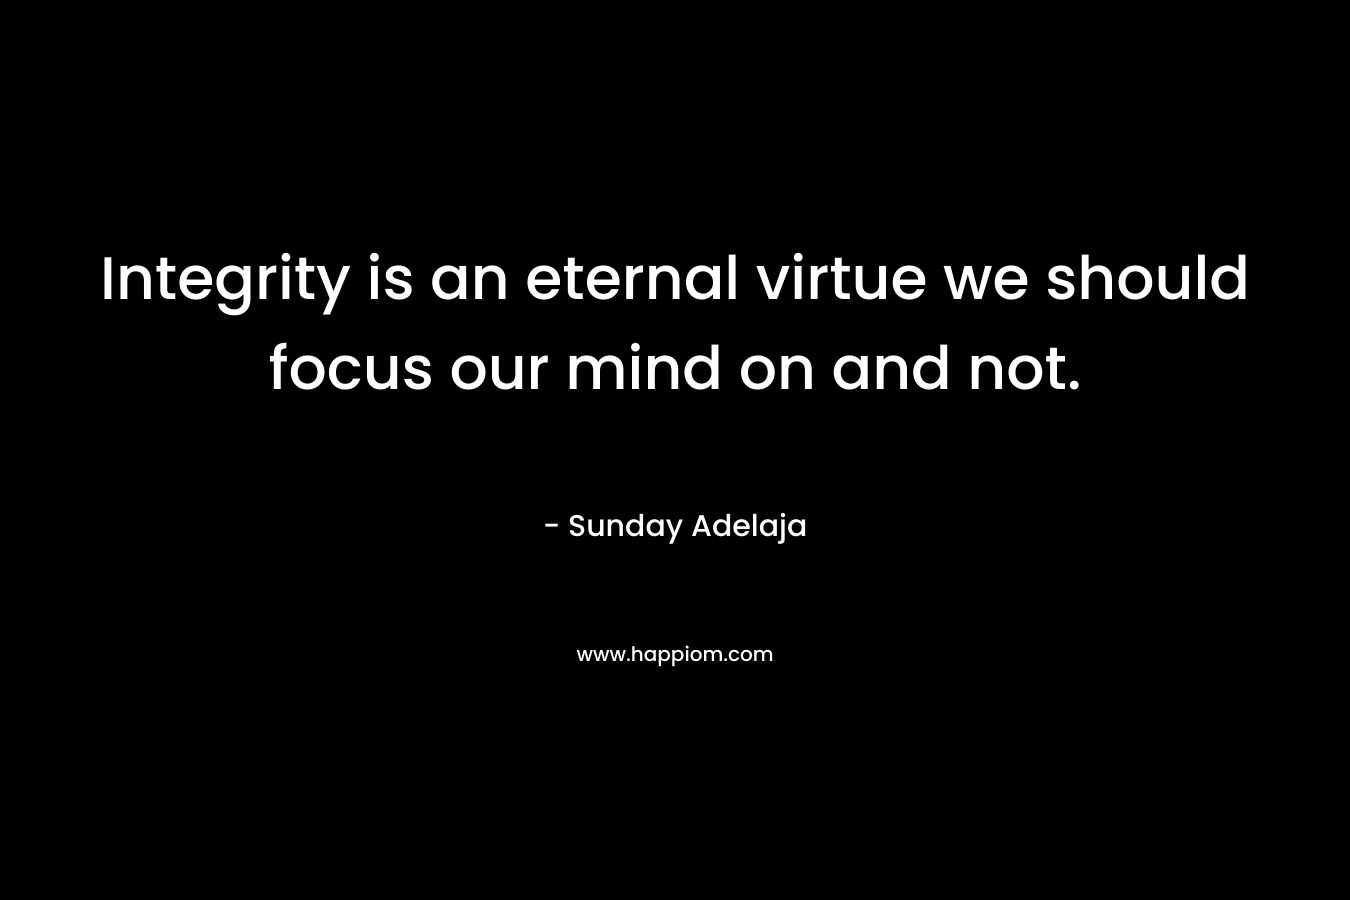 Integrity is an eternal virtue we should focus our mind on and not.